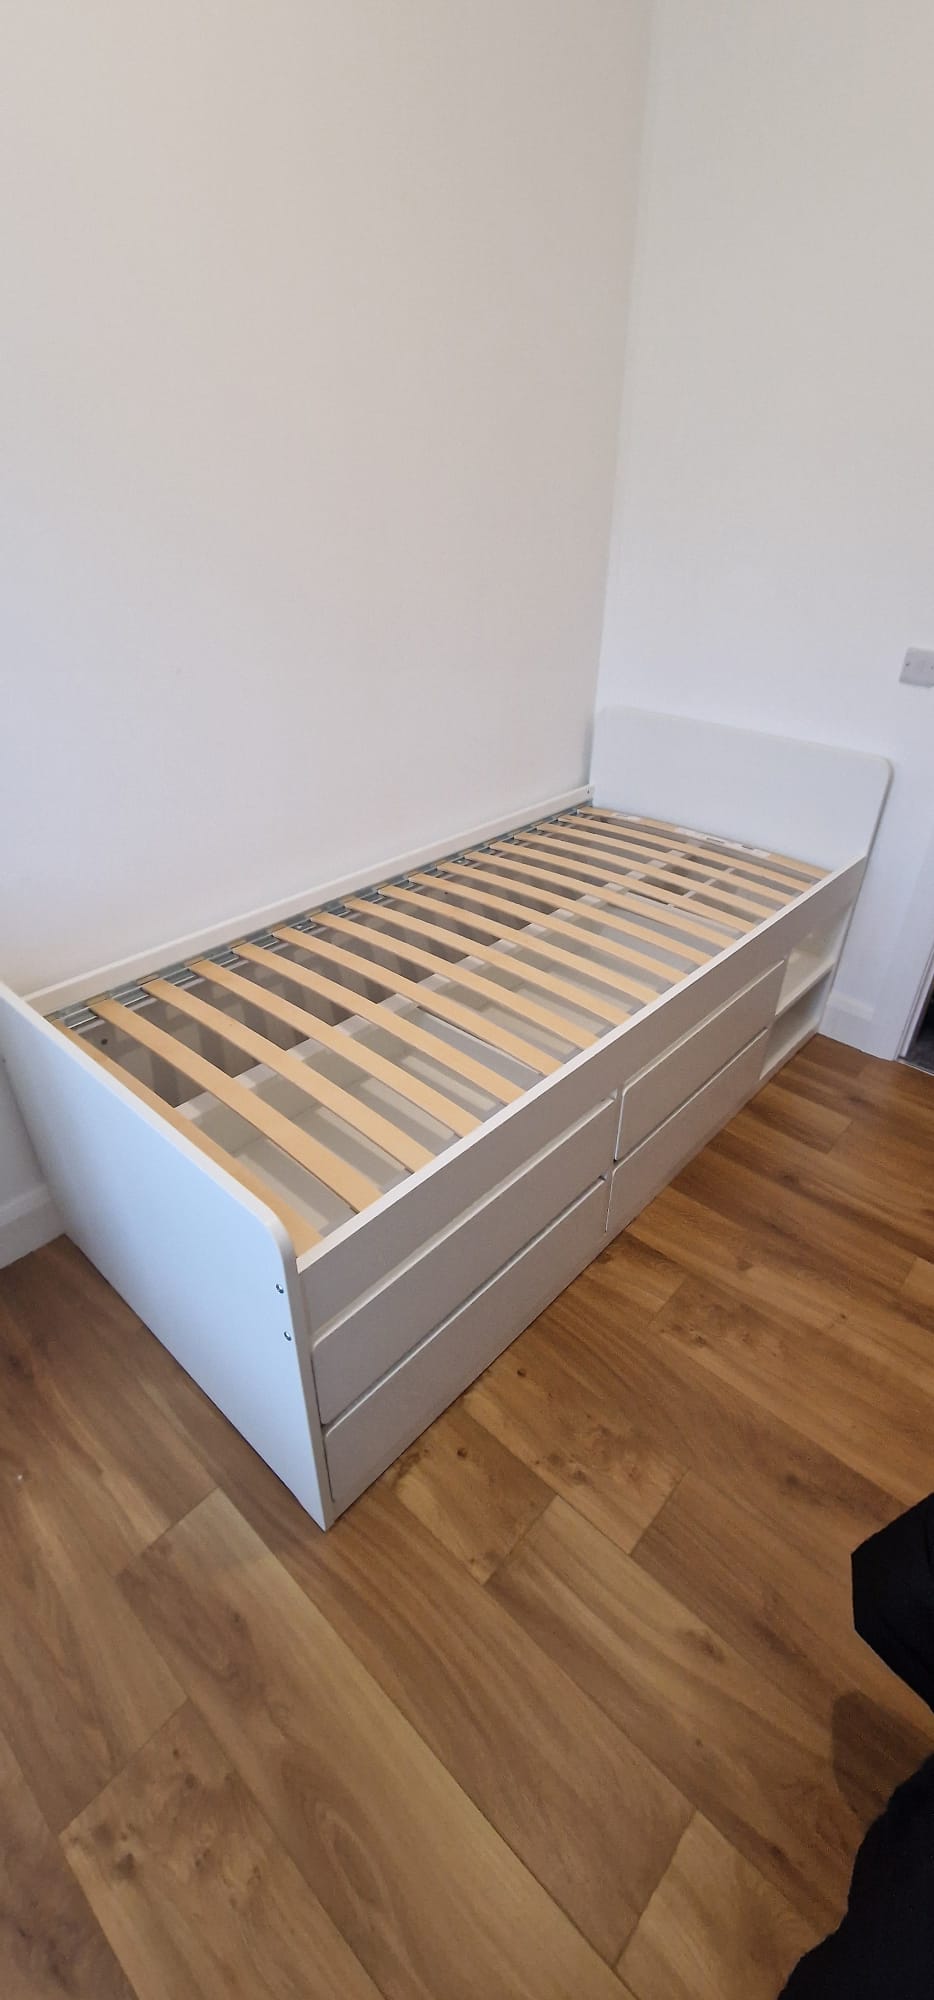 Bed base with drawers